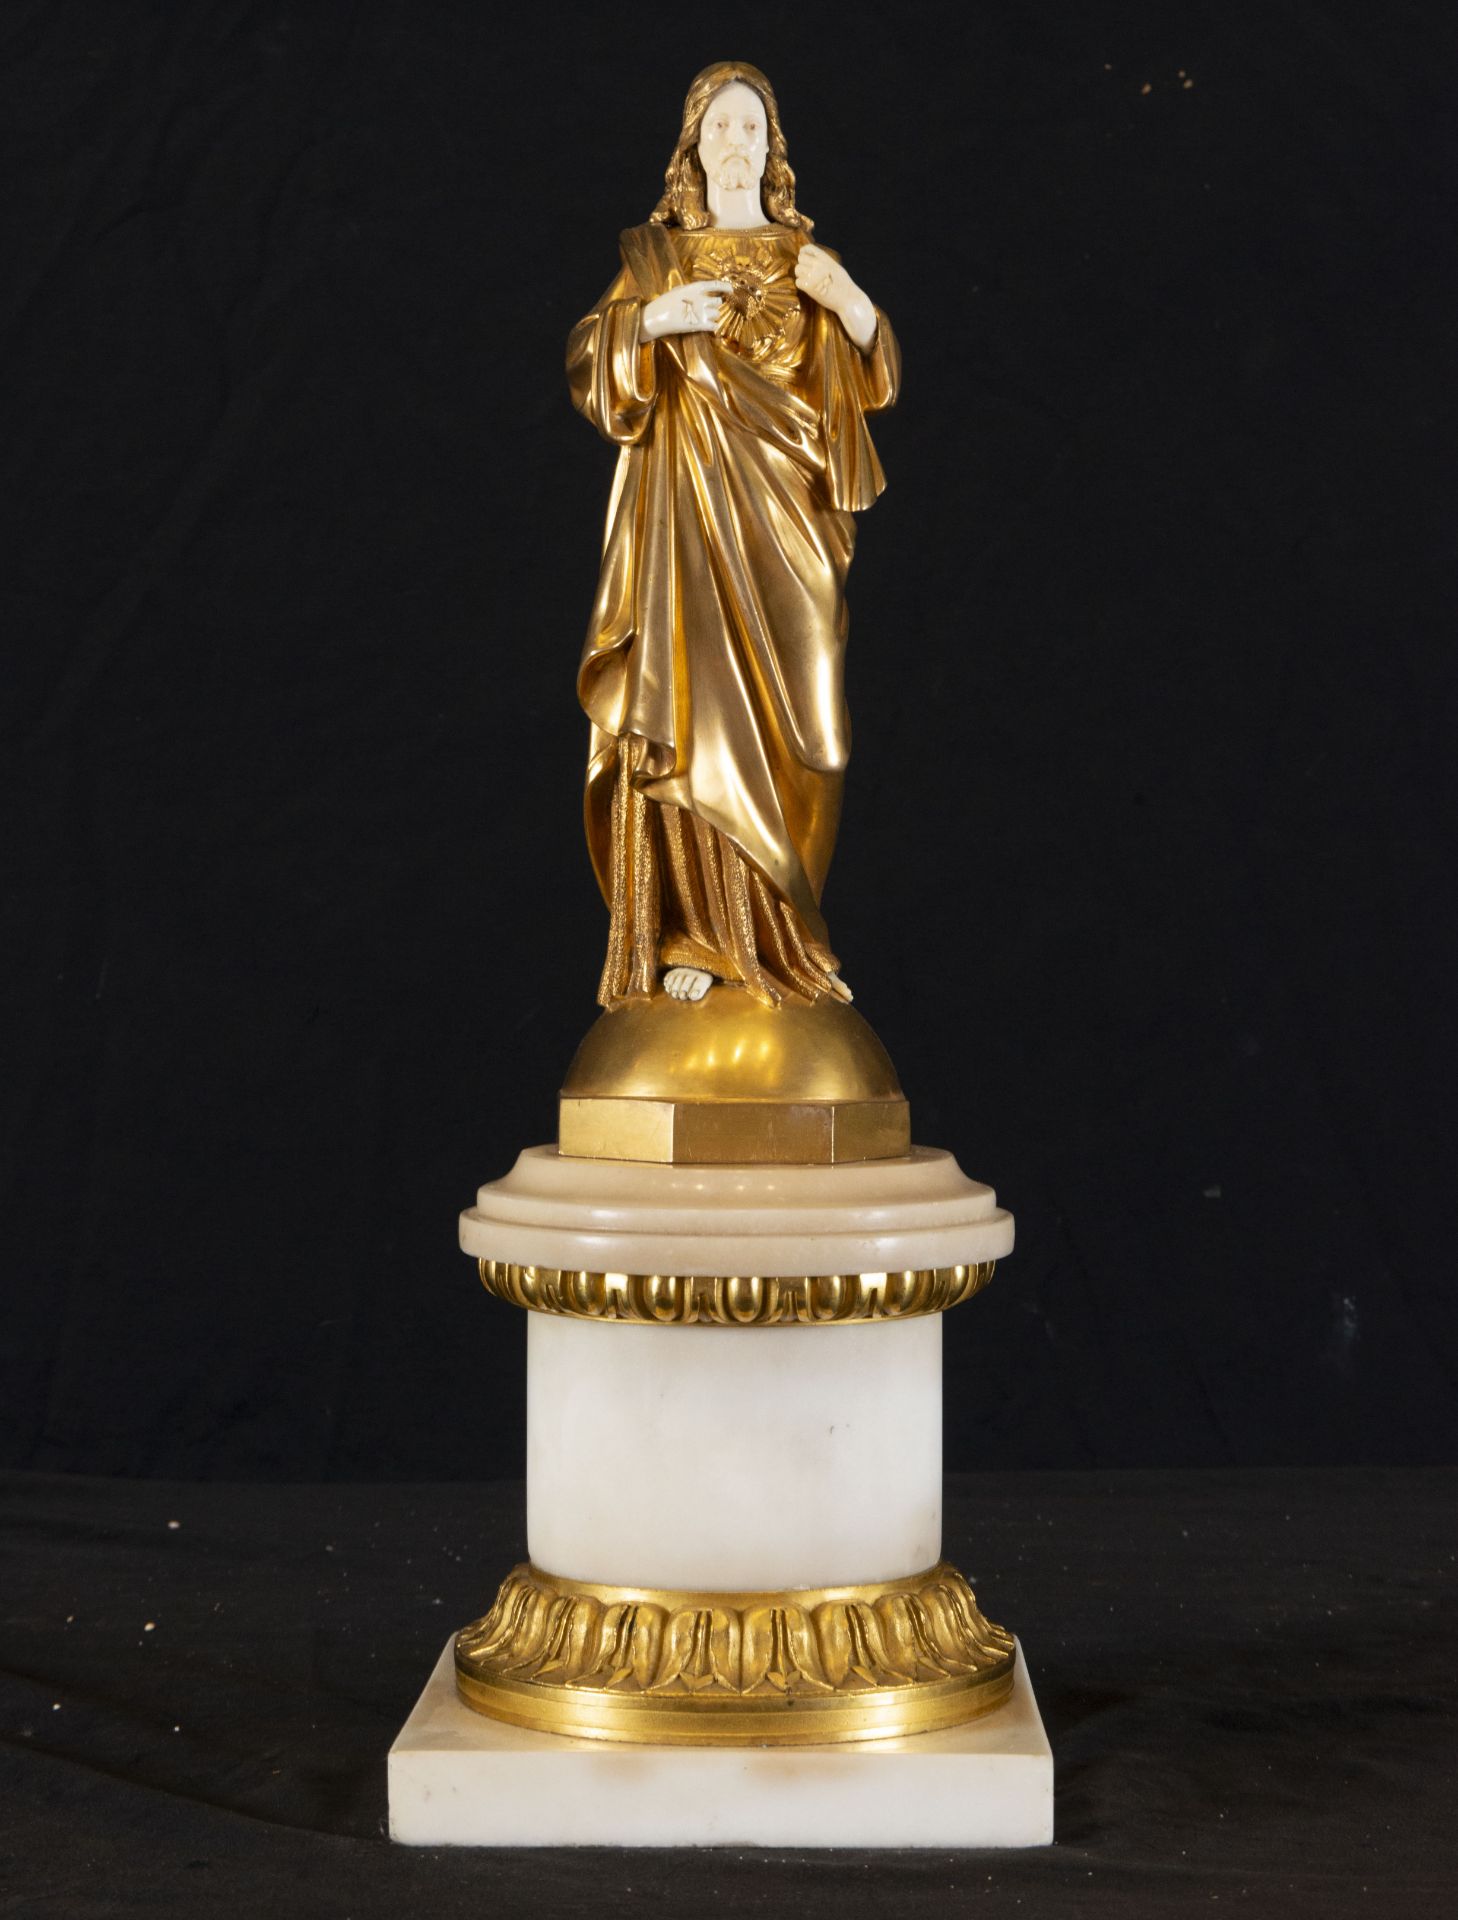 Beautiful Chryselephantine Sculpture from the Art Nouveau period representing the Sacred Heart of Je